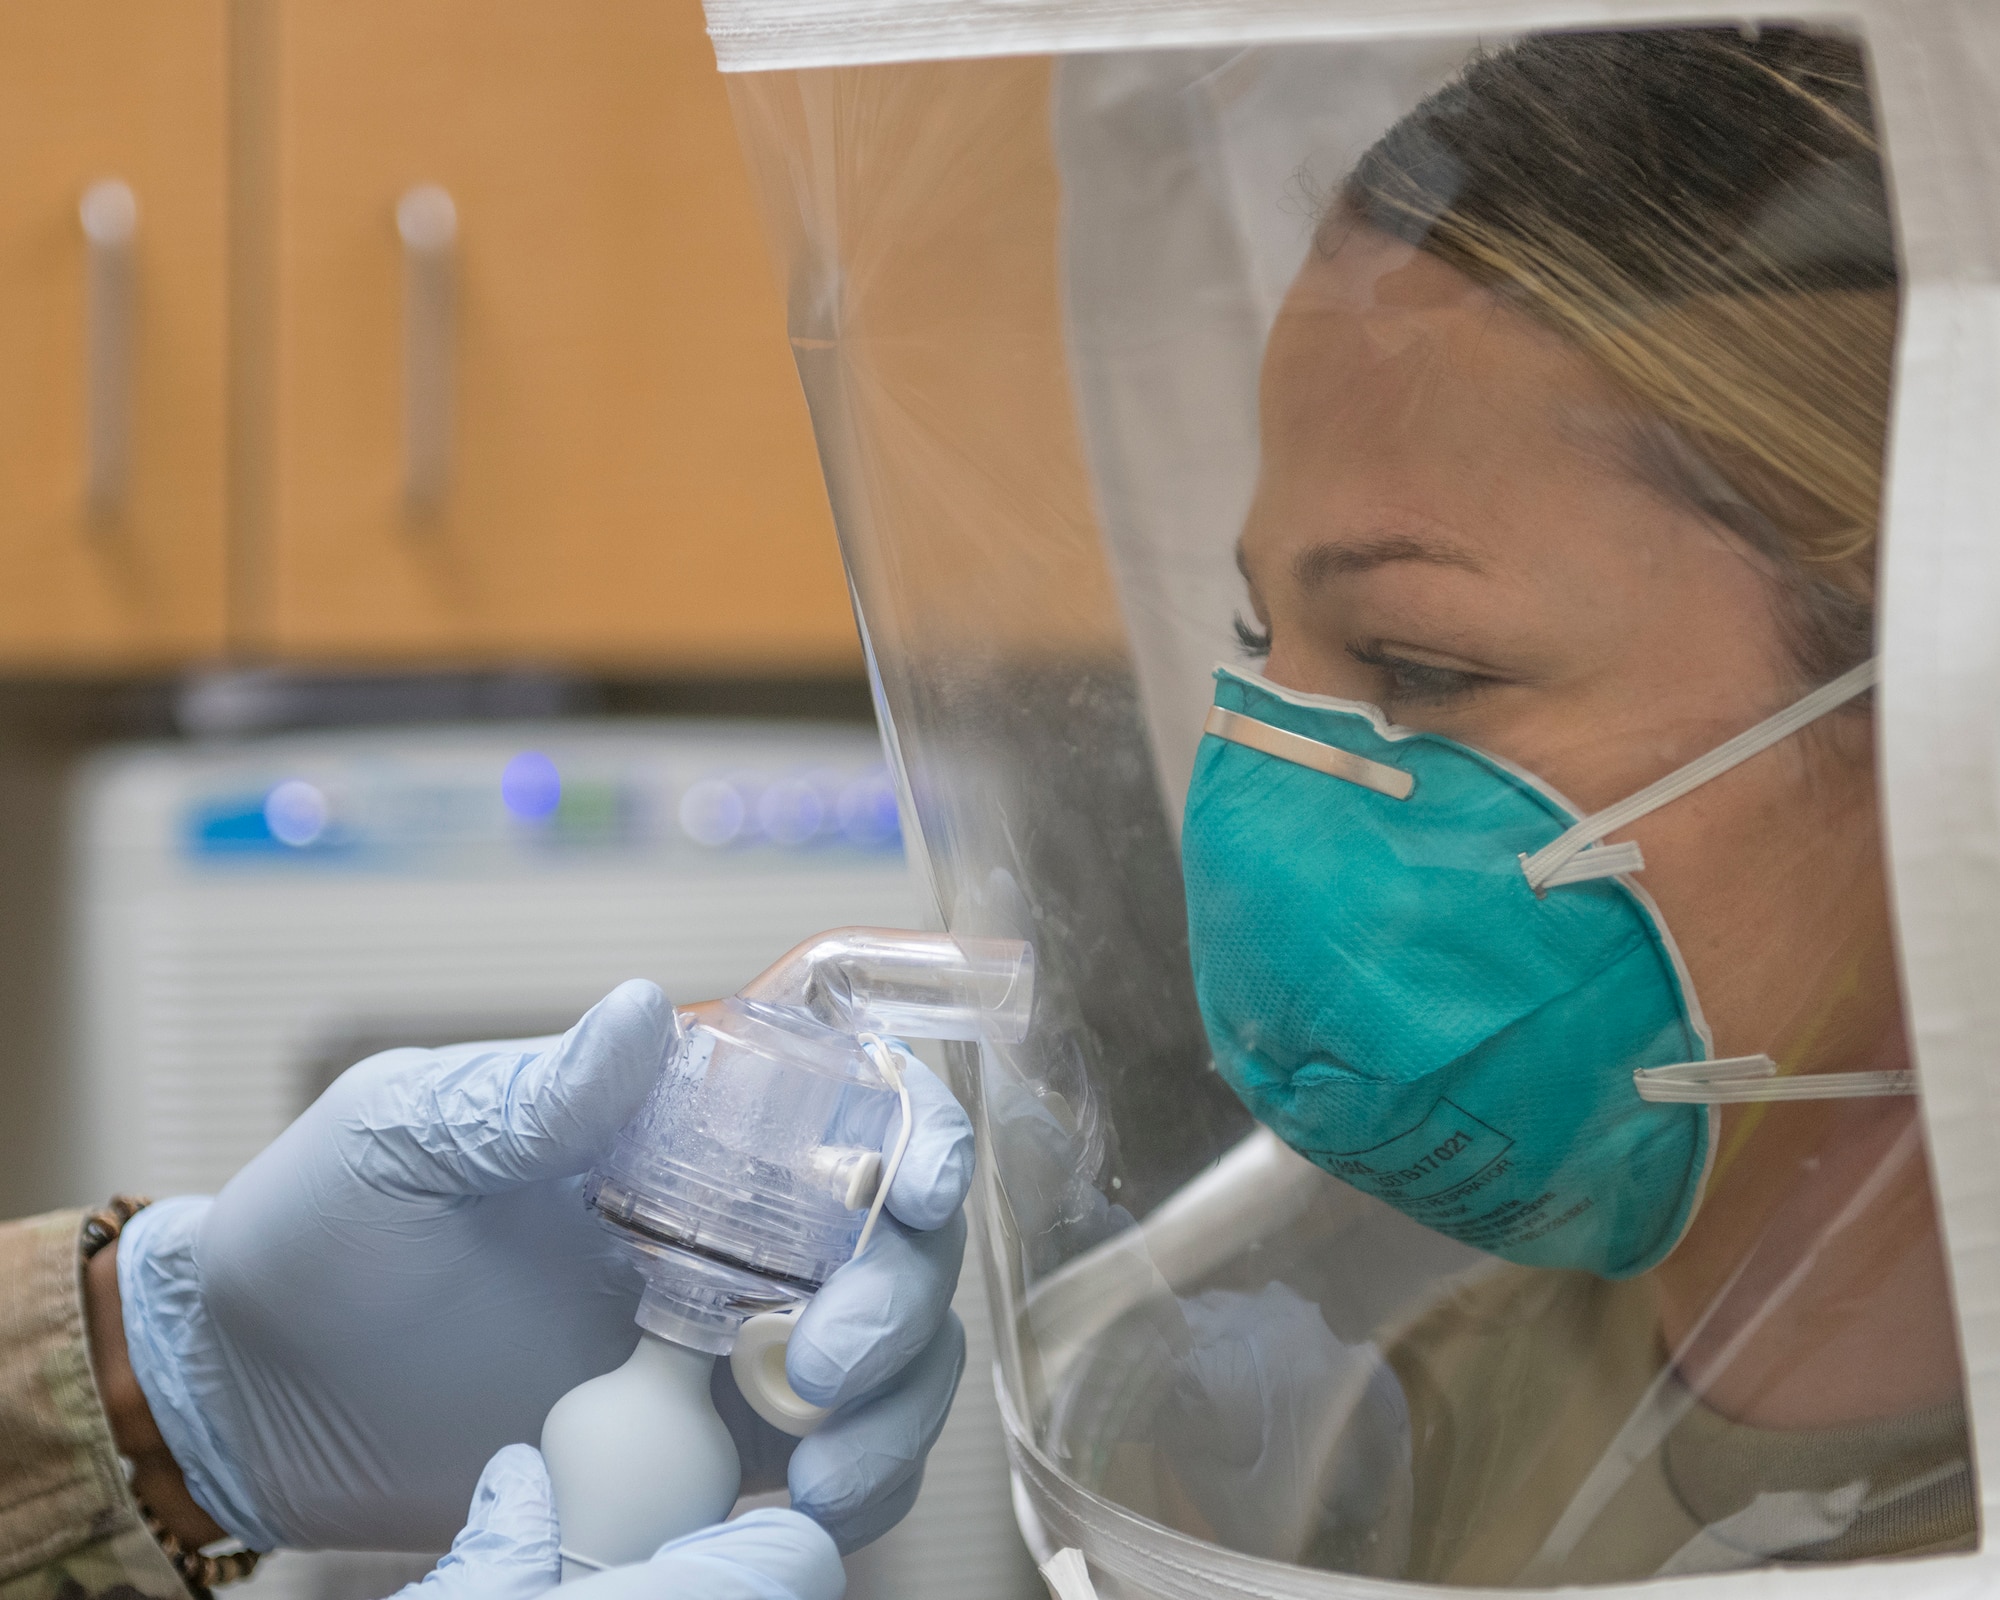 U.S. Air Force Staff Sgt. Beth Kenney, 56th Dental Squadron dental assistant, wears a N95 respirator mask while misted with a sensitivity and fit test solution at Luke Air Force Base, Arizona, April 1, 2020. The outer hood isolates the spray, and if the N95 mask is properly fitted, the individual wearing the mask will not smell or taste the solution. Bioenvironmental personnel are fitting masks to protect medical personnel from COVID-19  so they can care for patients. (U.S. Air Force photo by Senior Airman Leala Marquez)